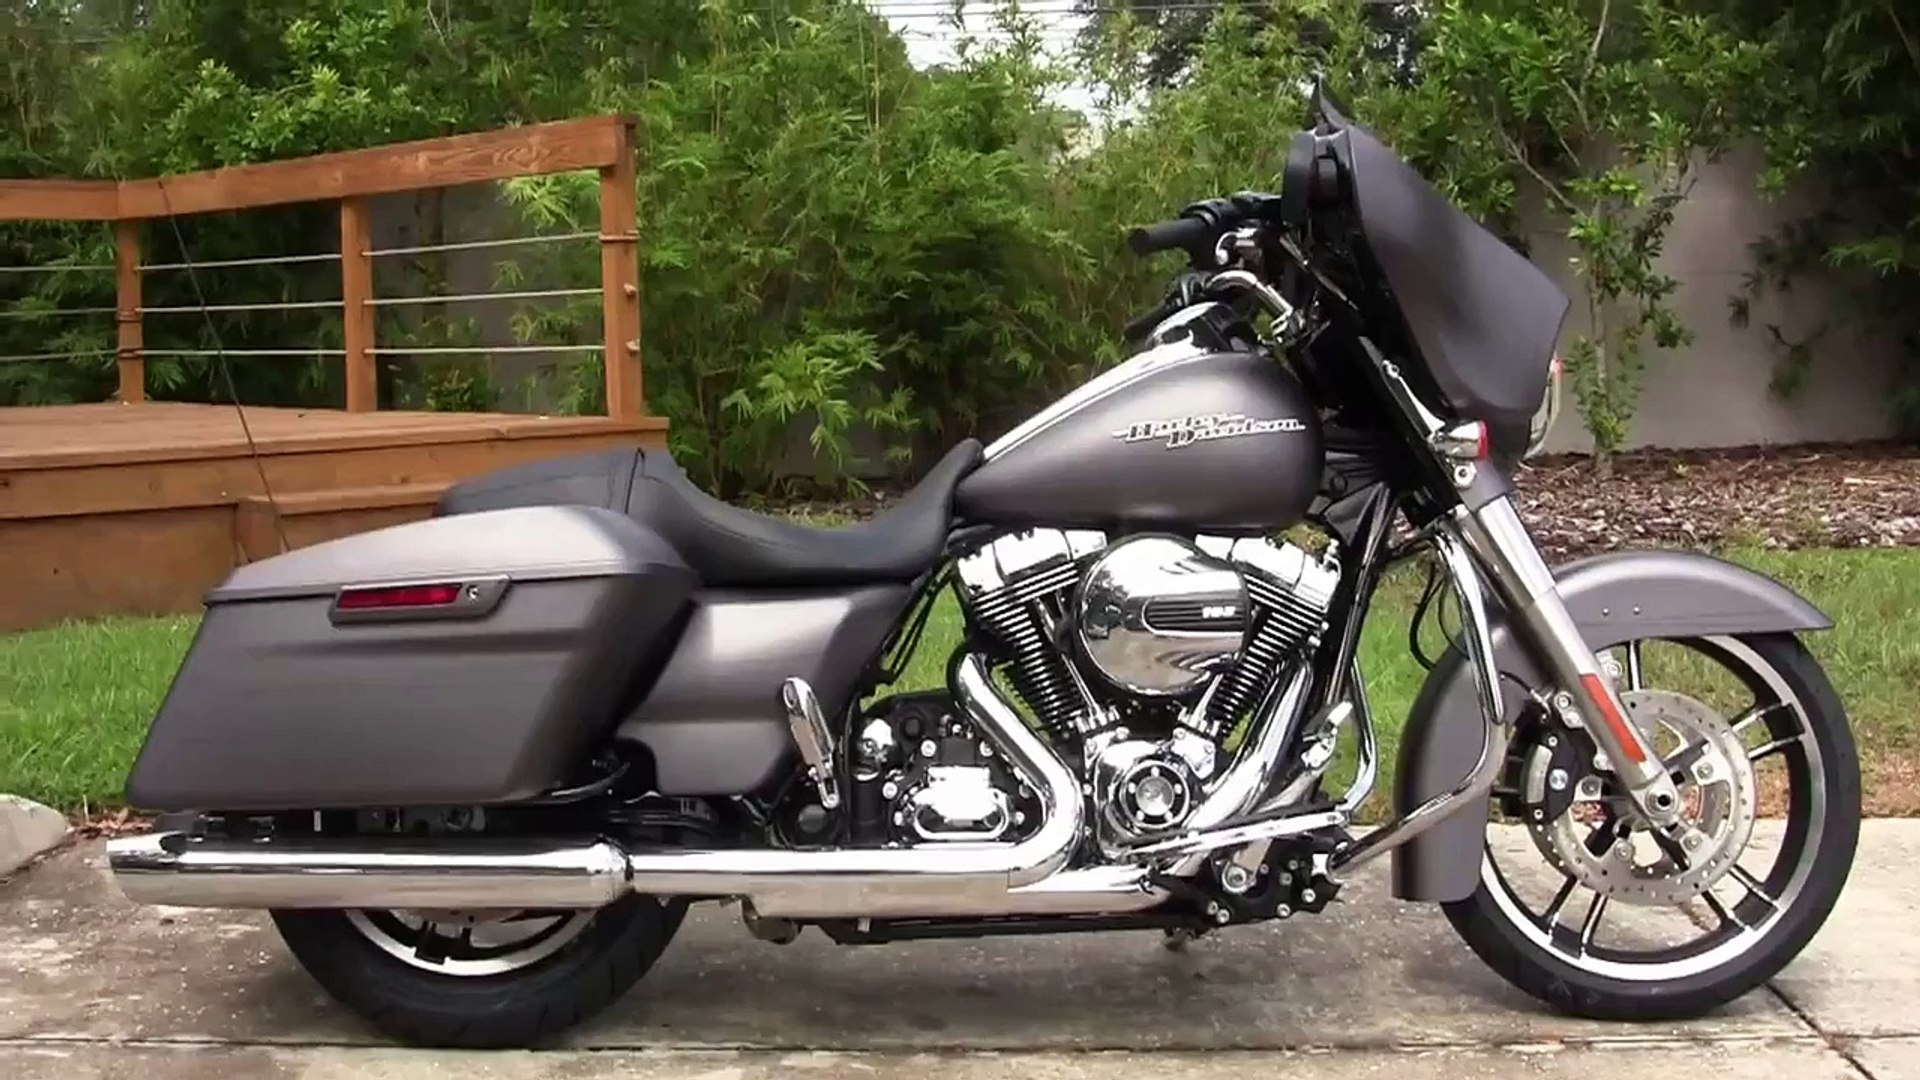 New 2016 Harley Davidson Street Glide Special Motorcycles for sale